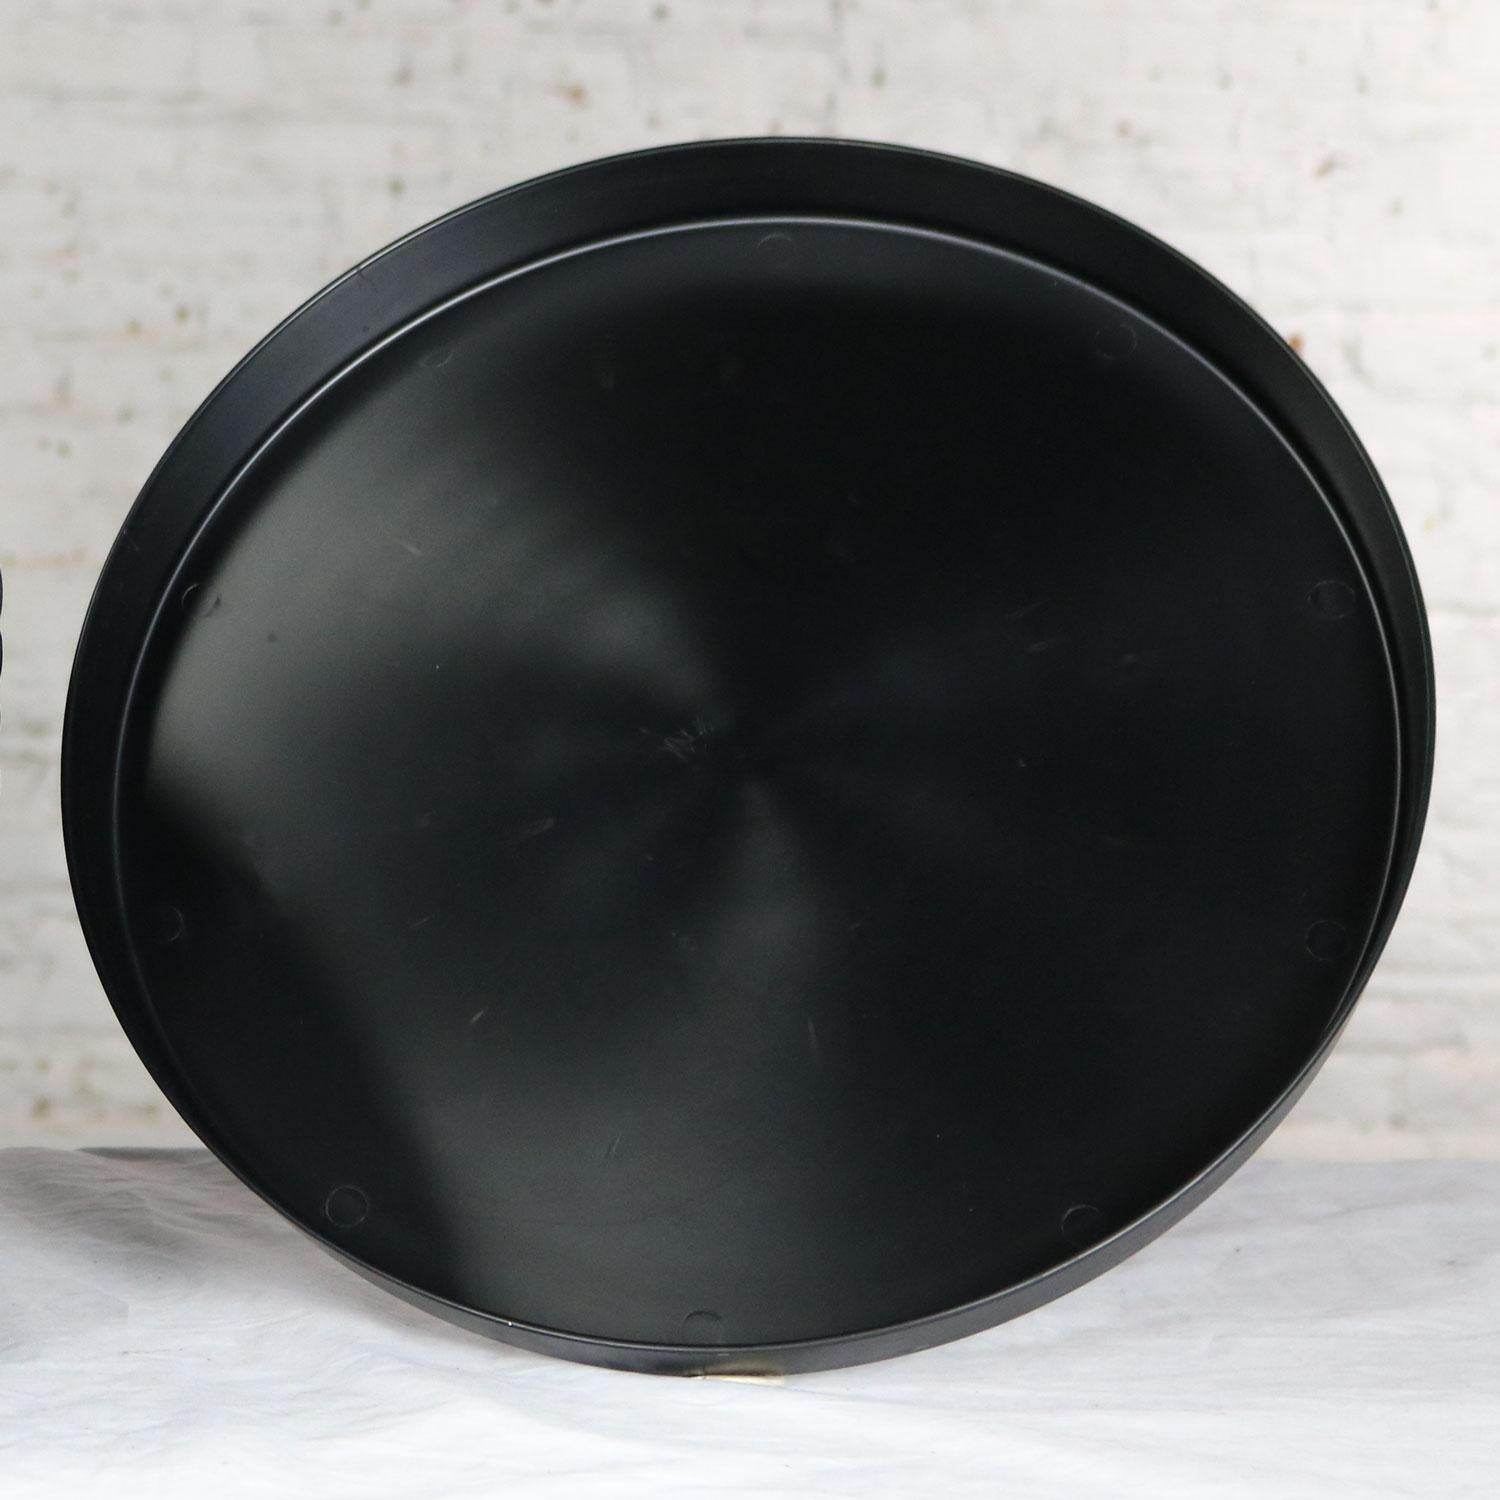 Incredible and fun Mid-Century Modern black plastic trays called Splatter Platters and manufactured by Sabe’s of Fort Smith, Arkansas. There are 12 and they are in wonderful condition. Most have never been used. Some have minor scuffs and scratches.